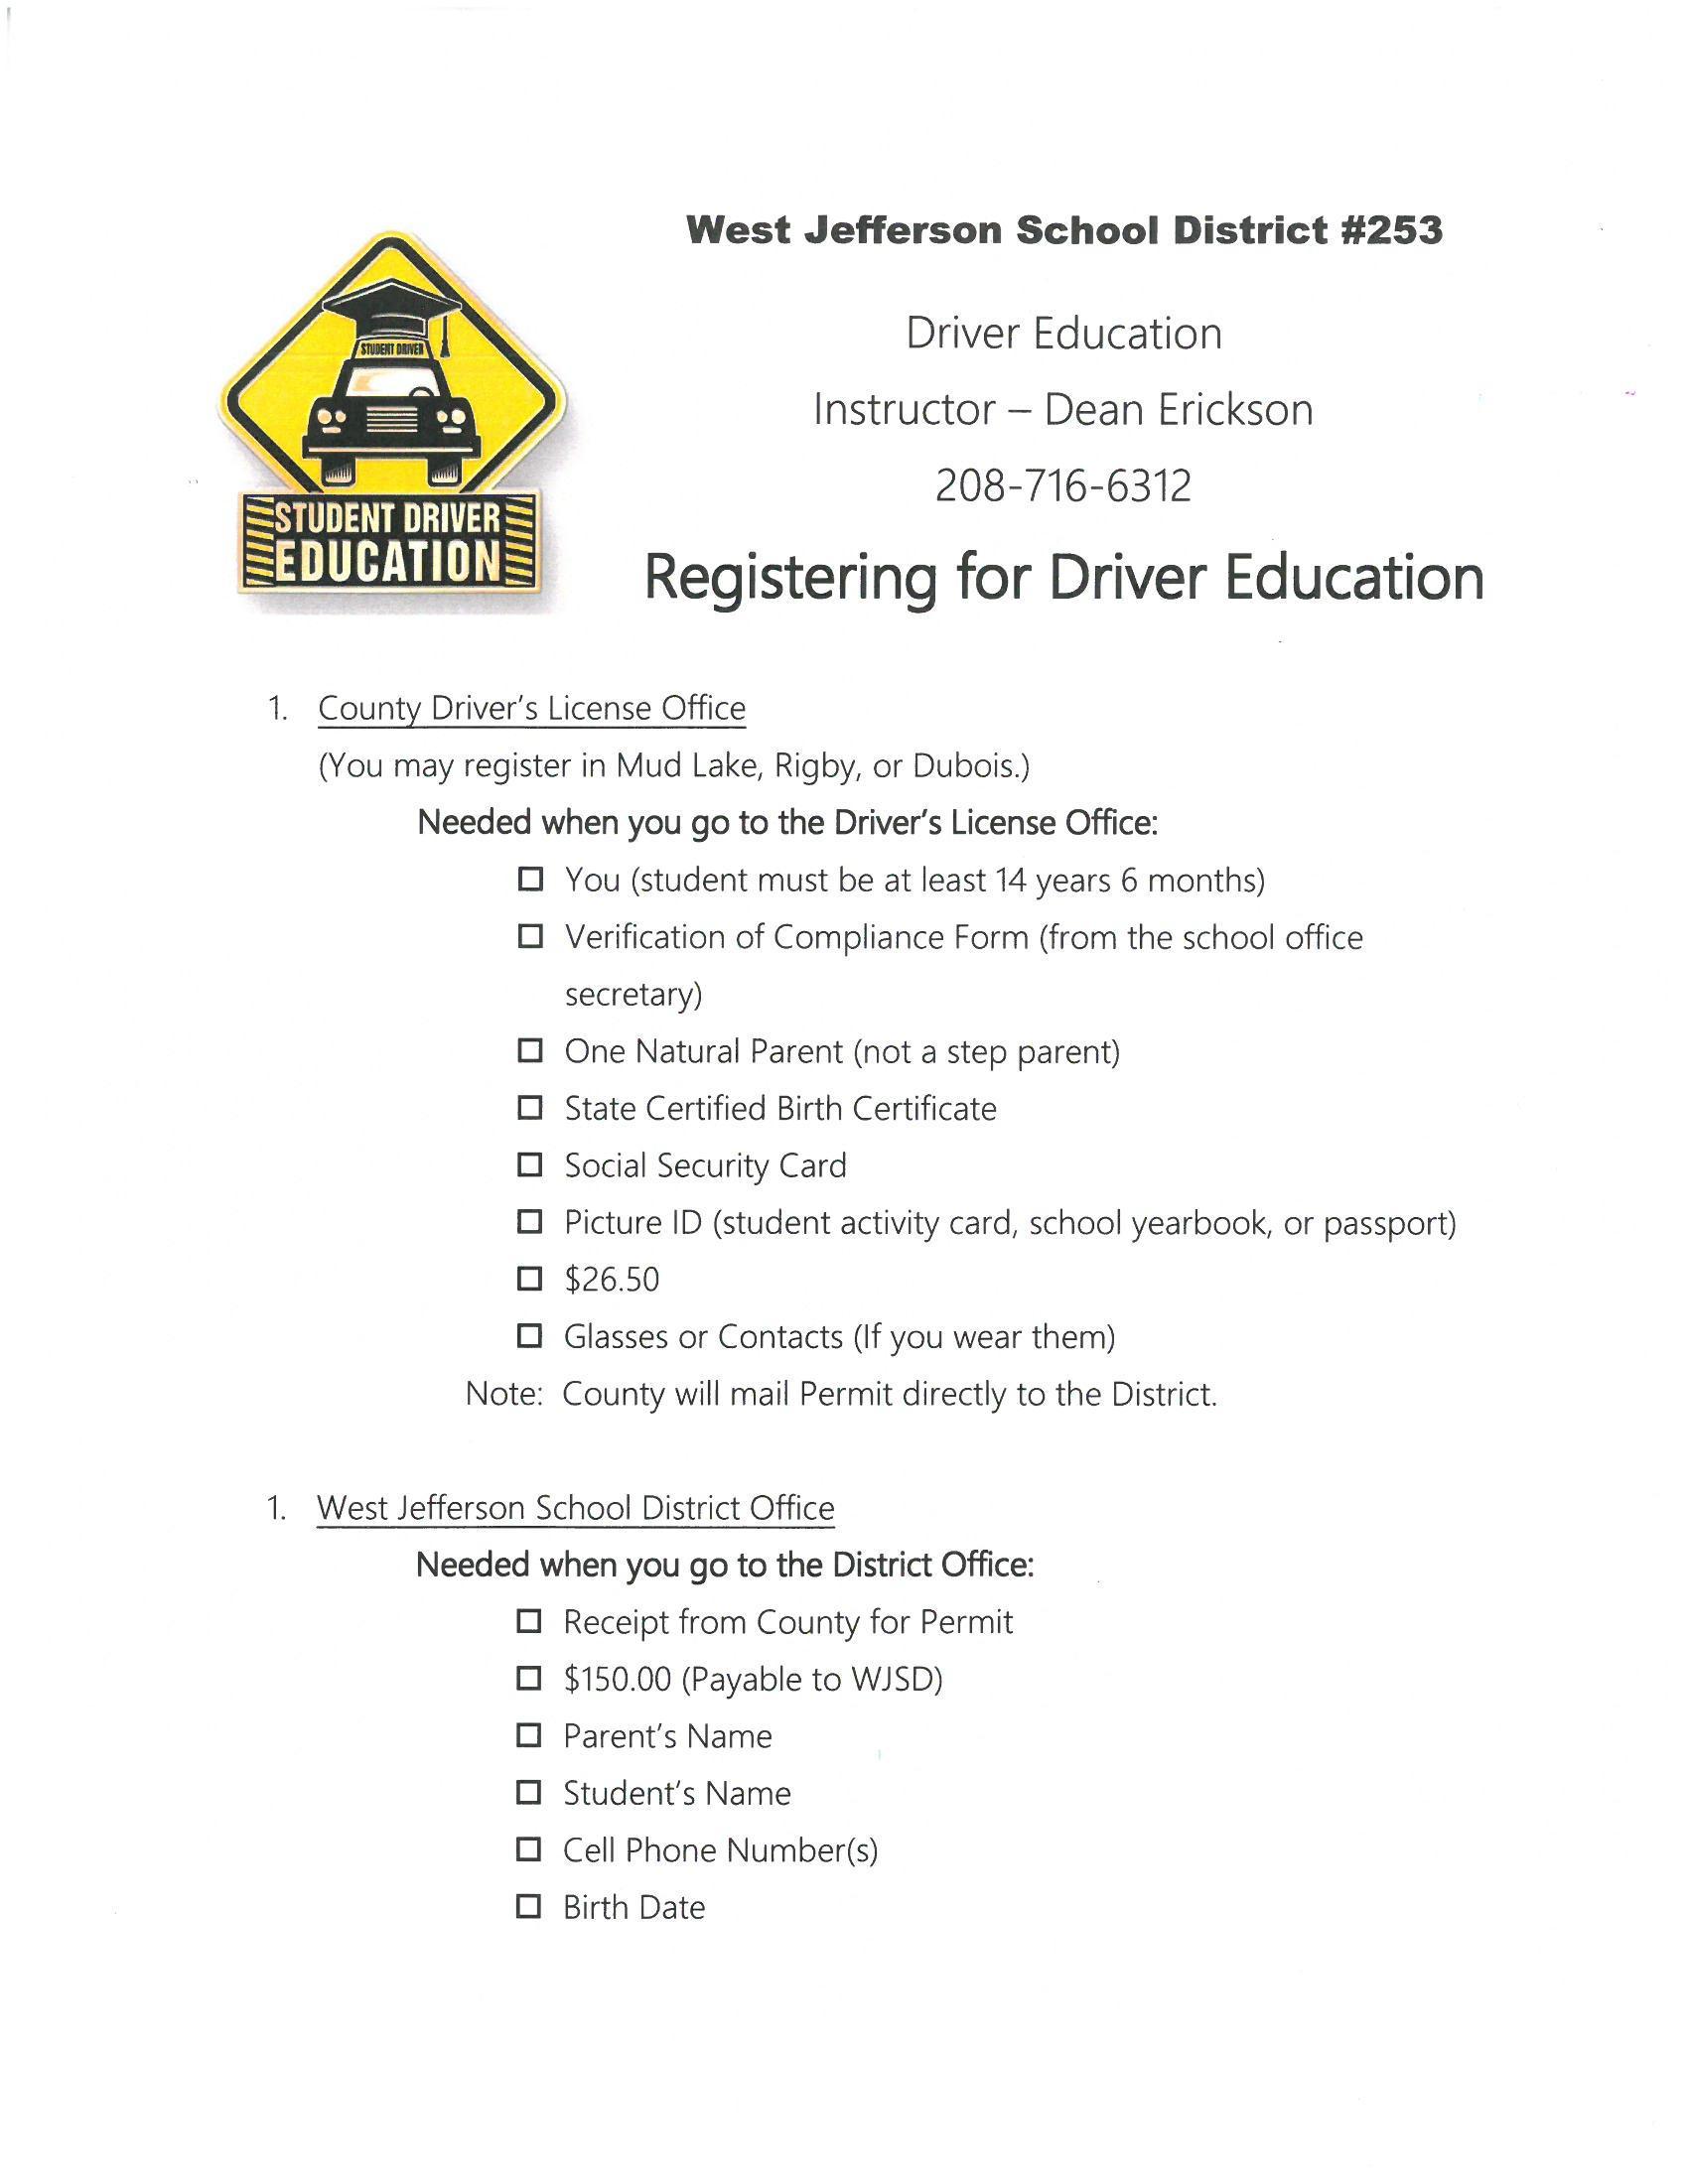 drivers education